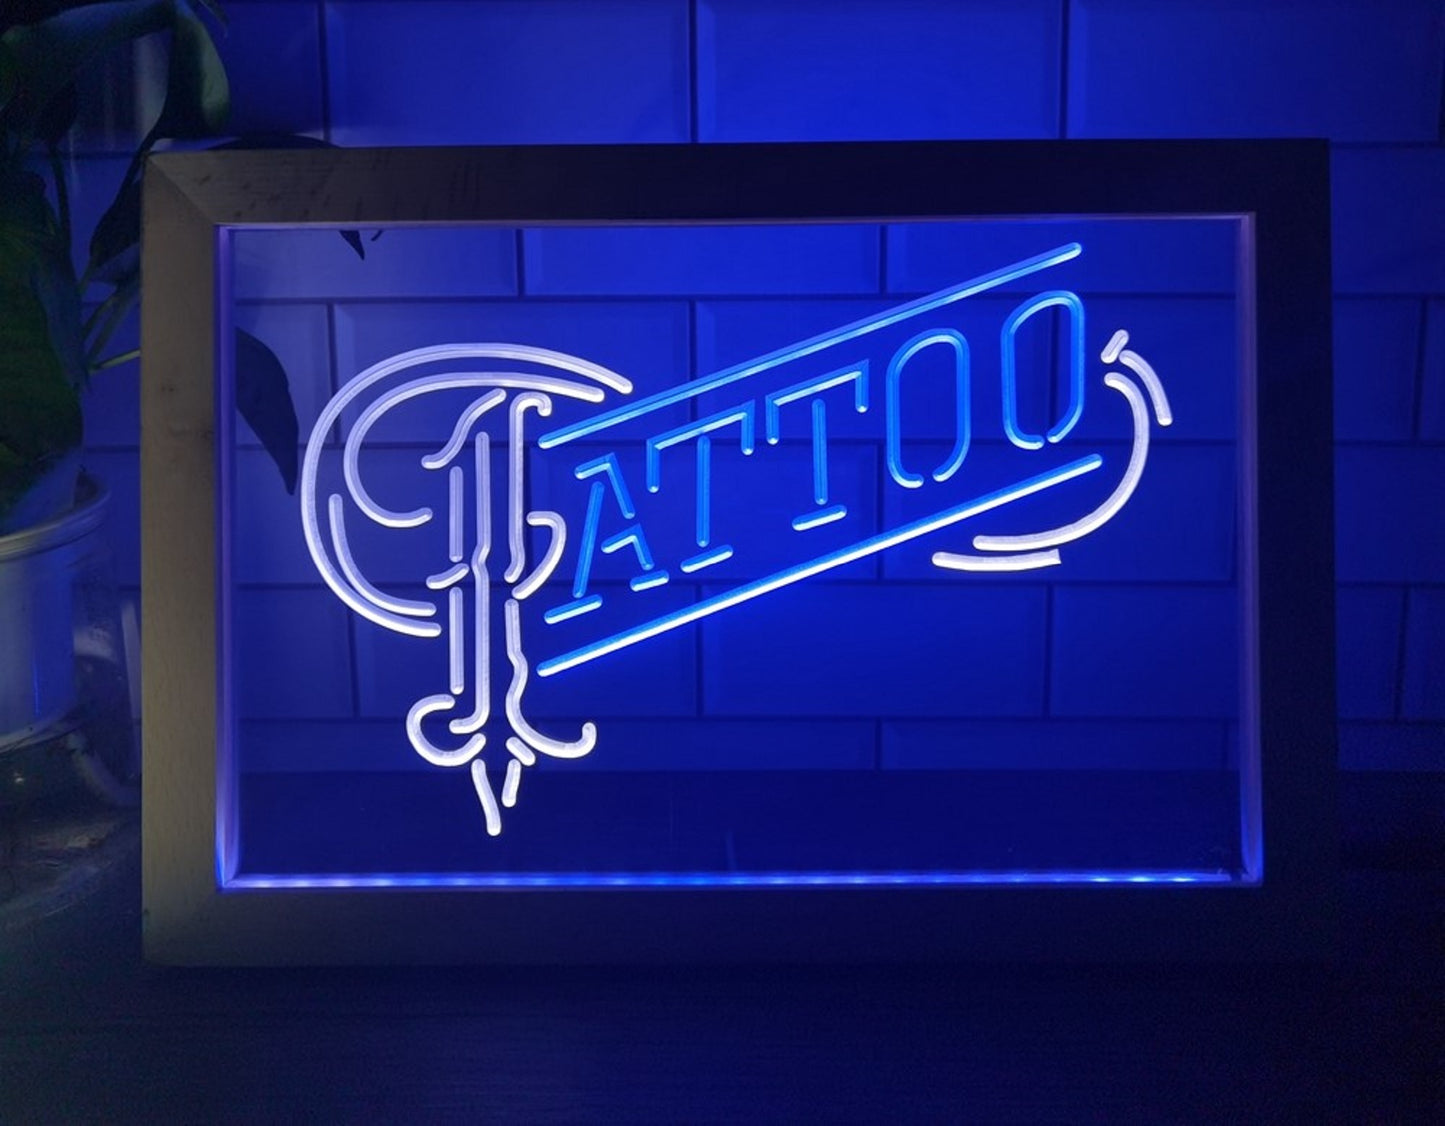 Neon Sign Framed Dual Color Tattoo Shop Wall Desktop Decor Free Shipping